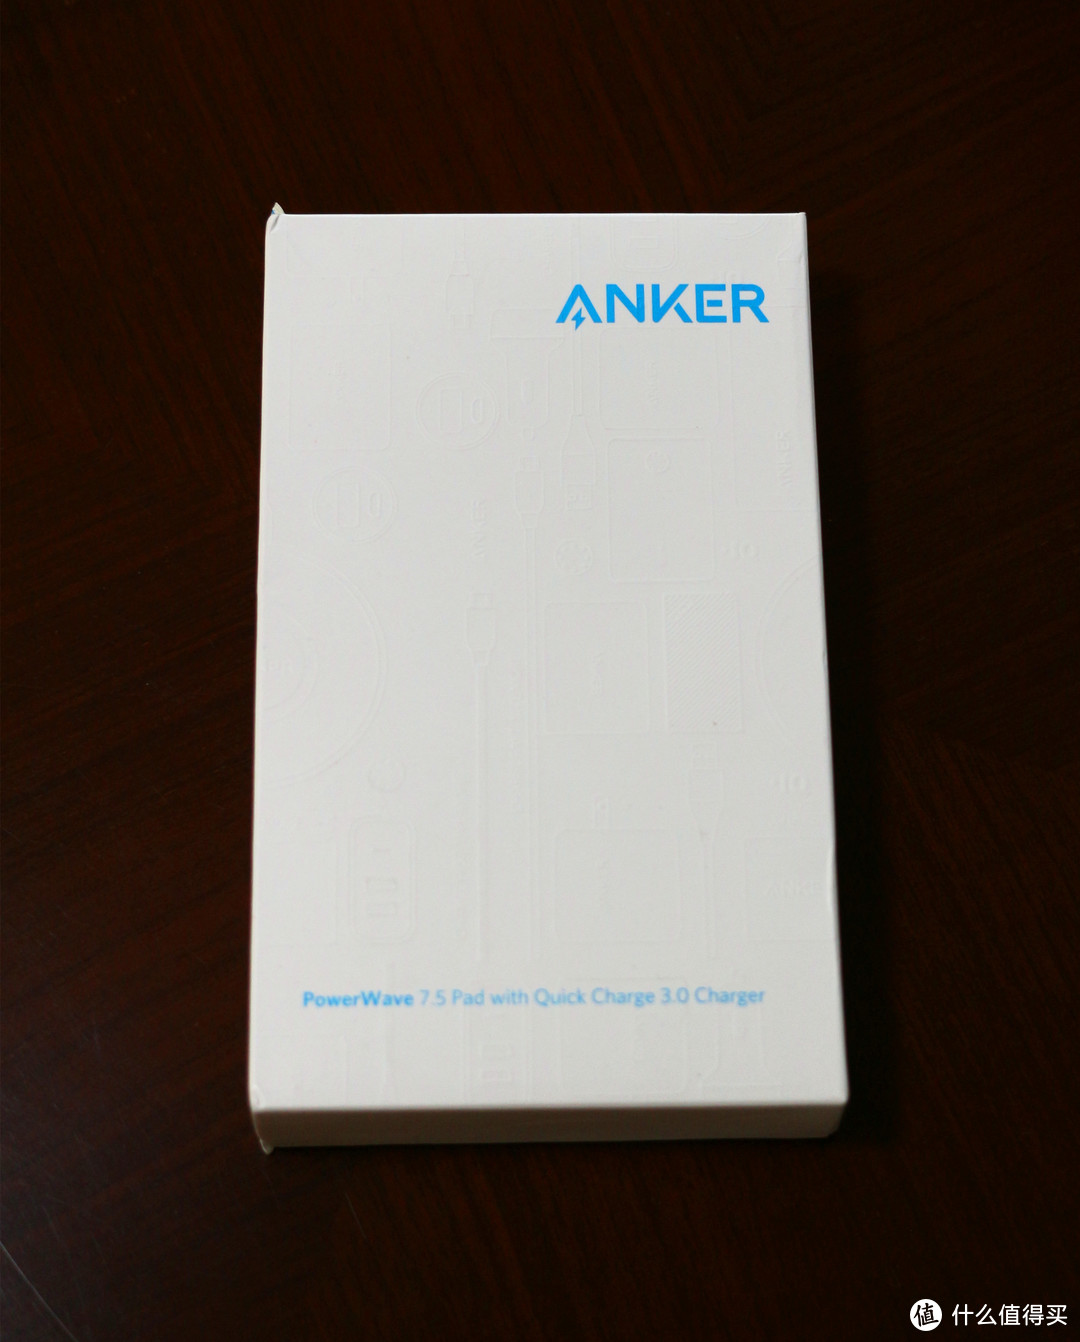 Anker Super Wireless Charger，体验无束缚随拿随放的Mobile Lifestyle